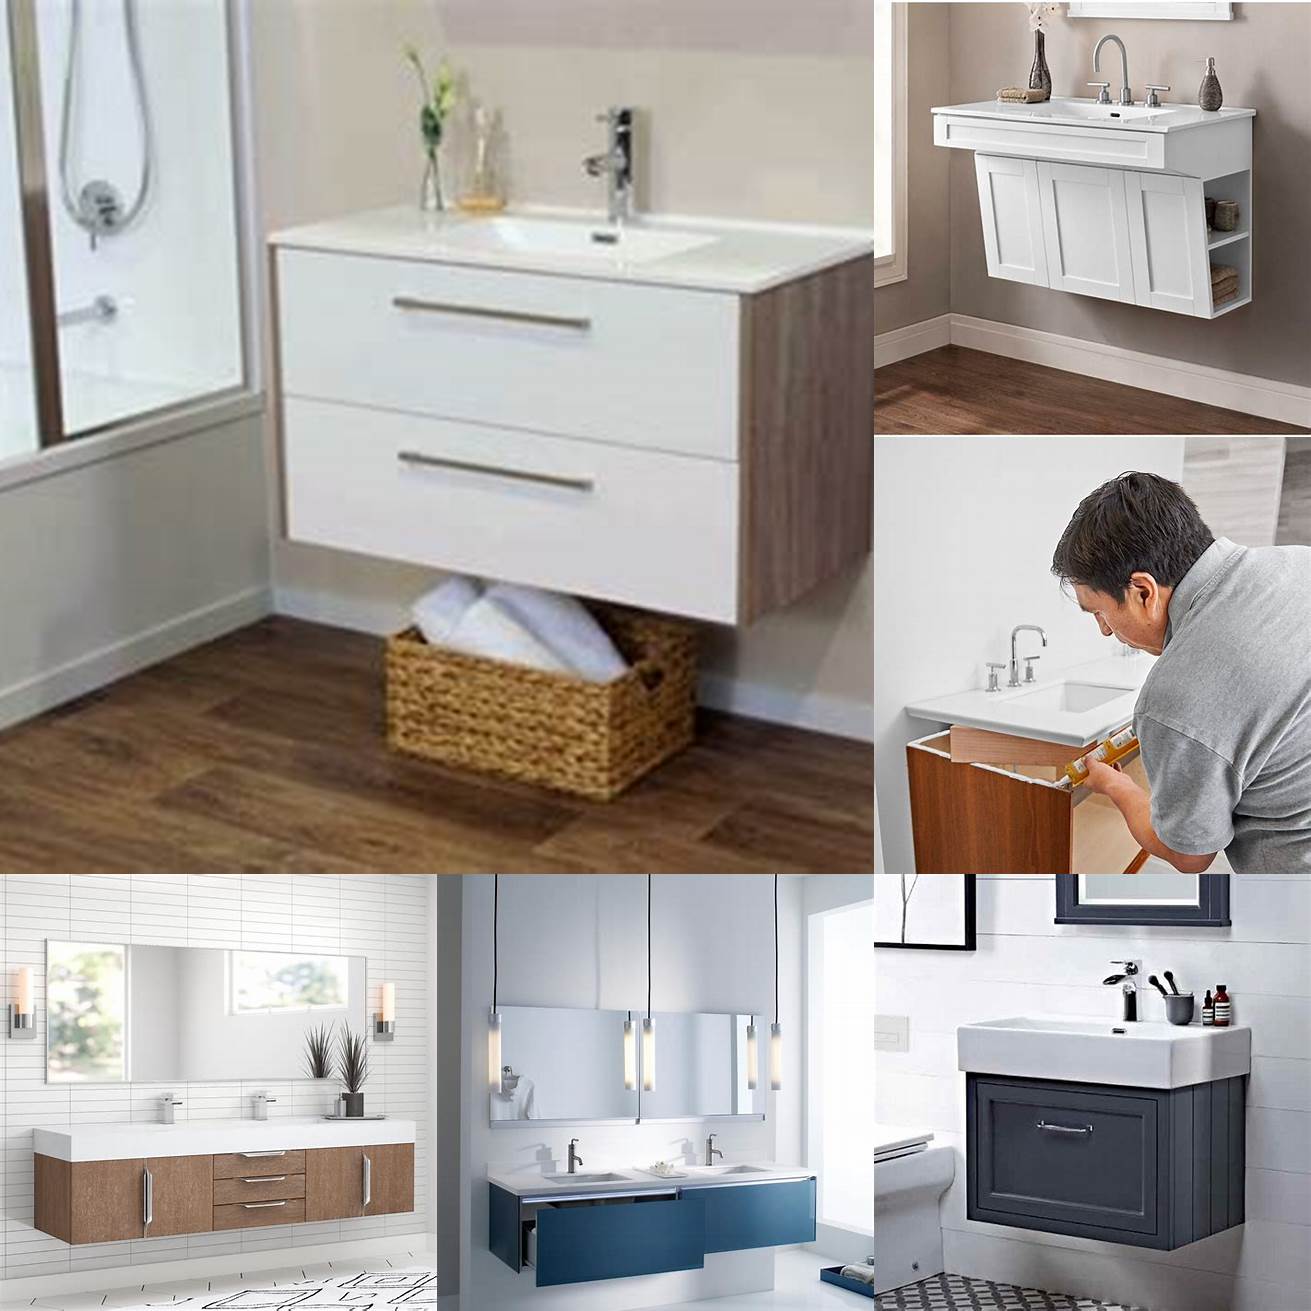 Easy installation Wall mounted vanities are generally easier to install than traditional vanities